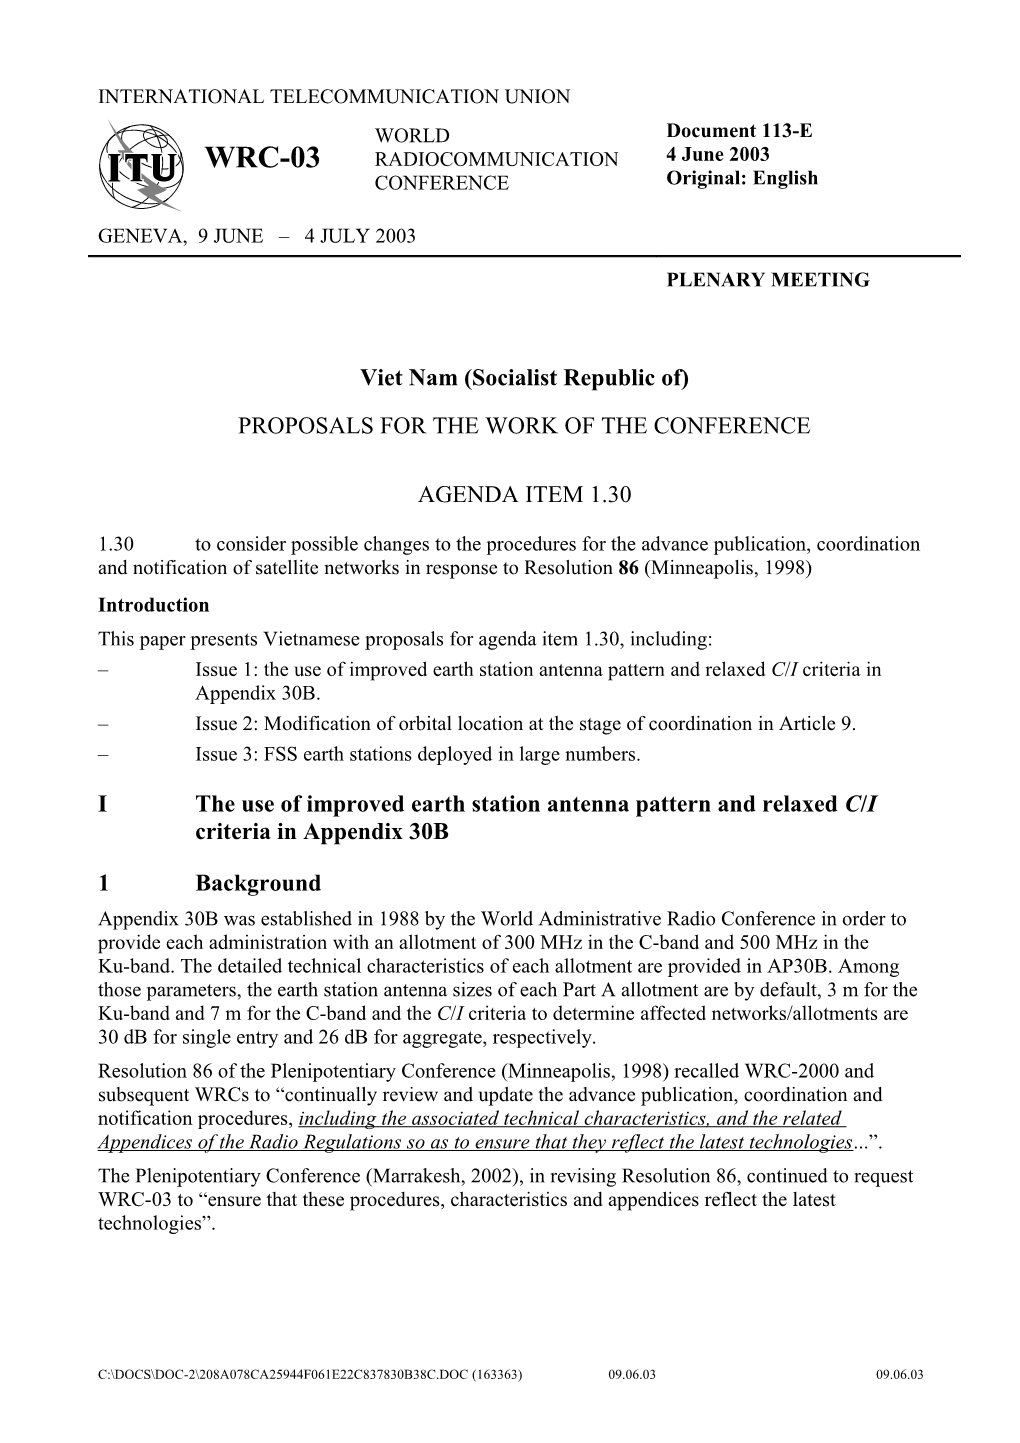 Proposals for the Work of the Conference: Agenda Item 1.30